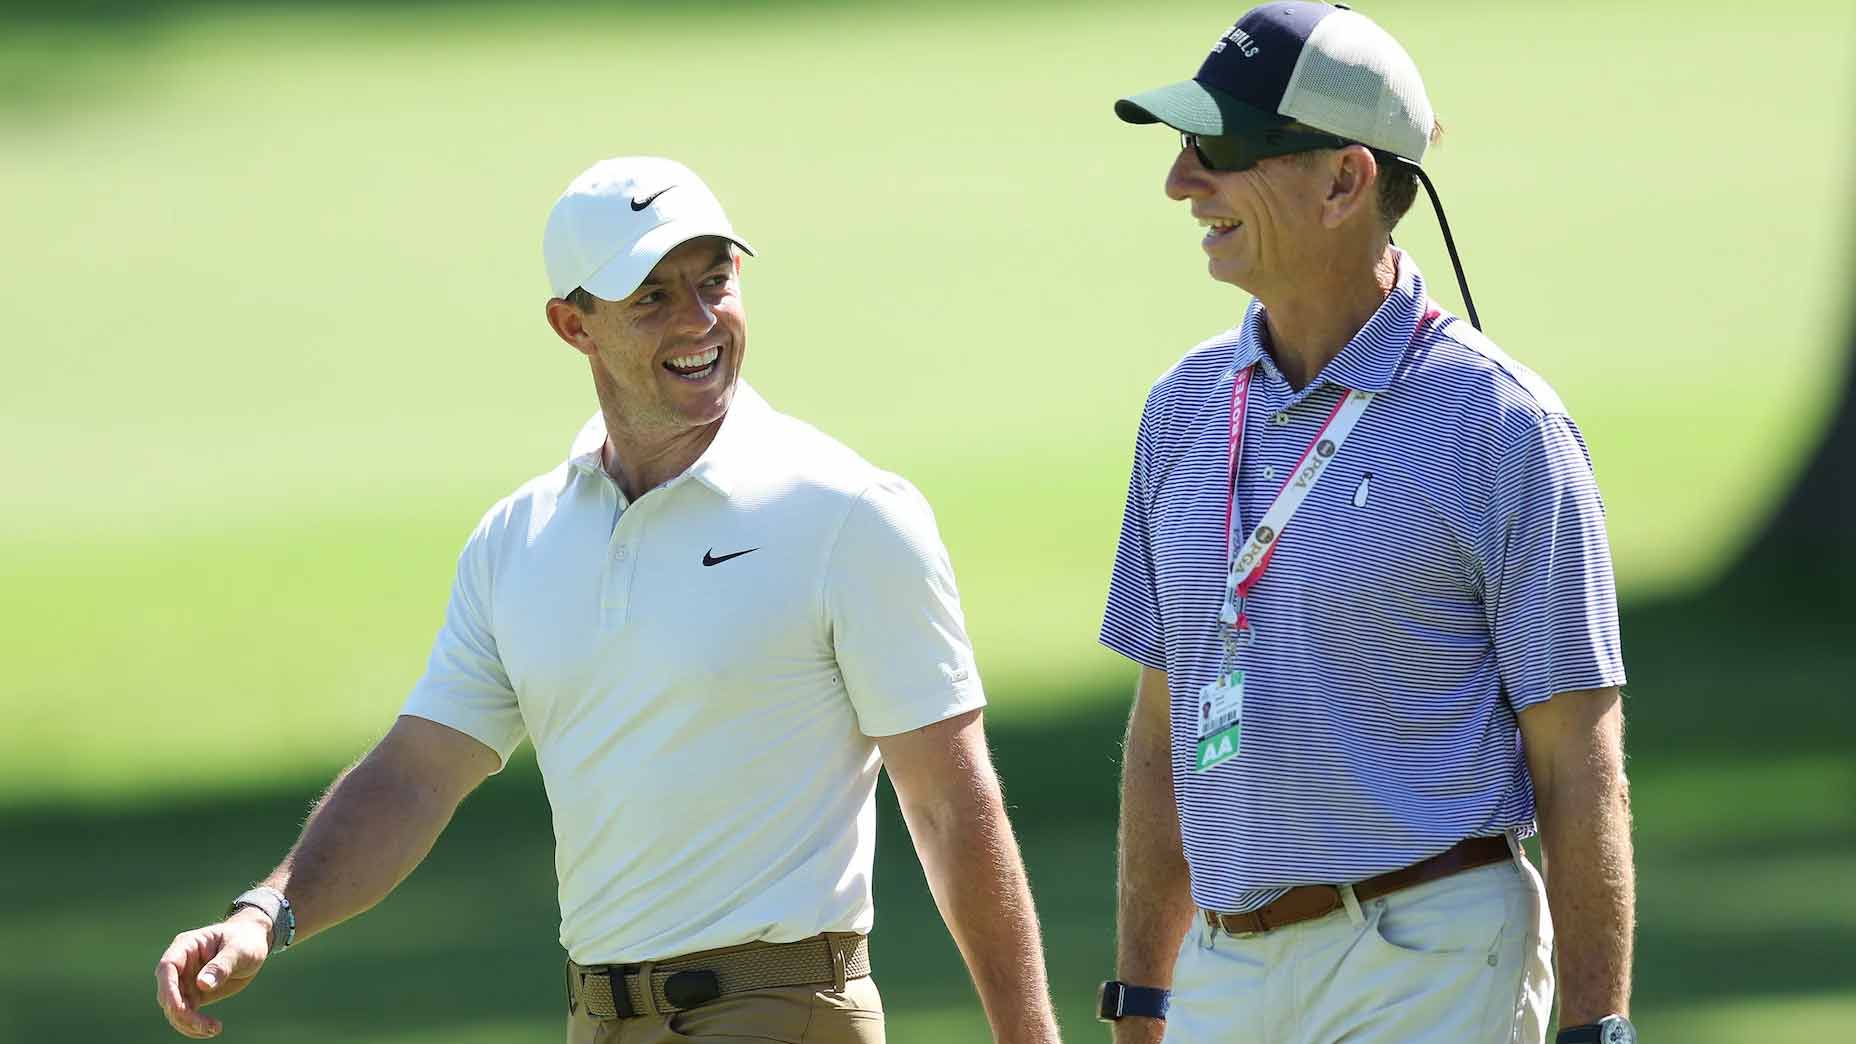 Rory McIlroy walks with coach at the 2022 US Open